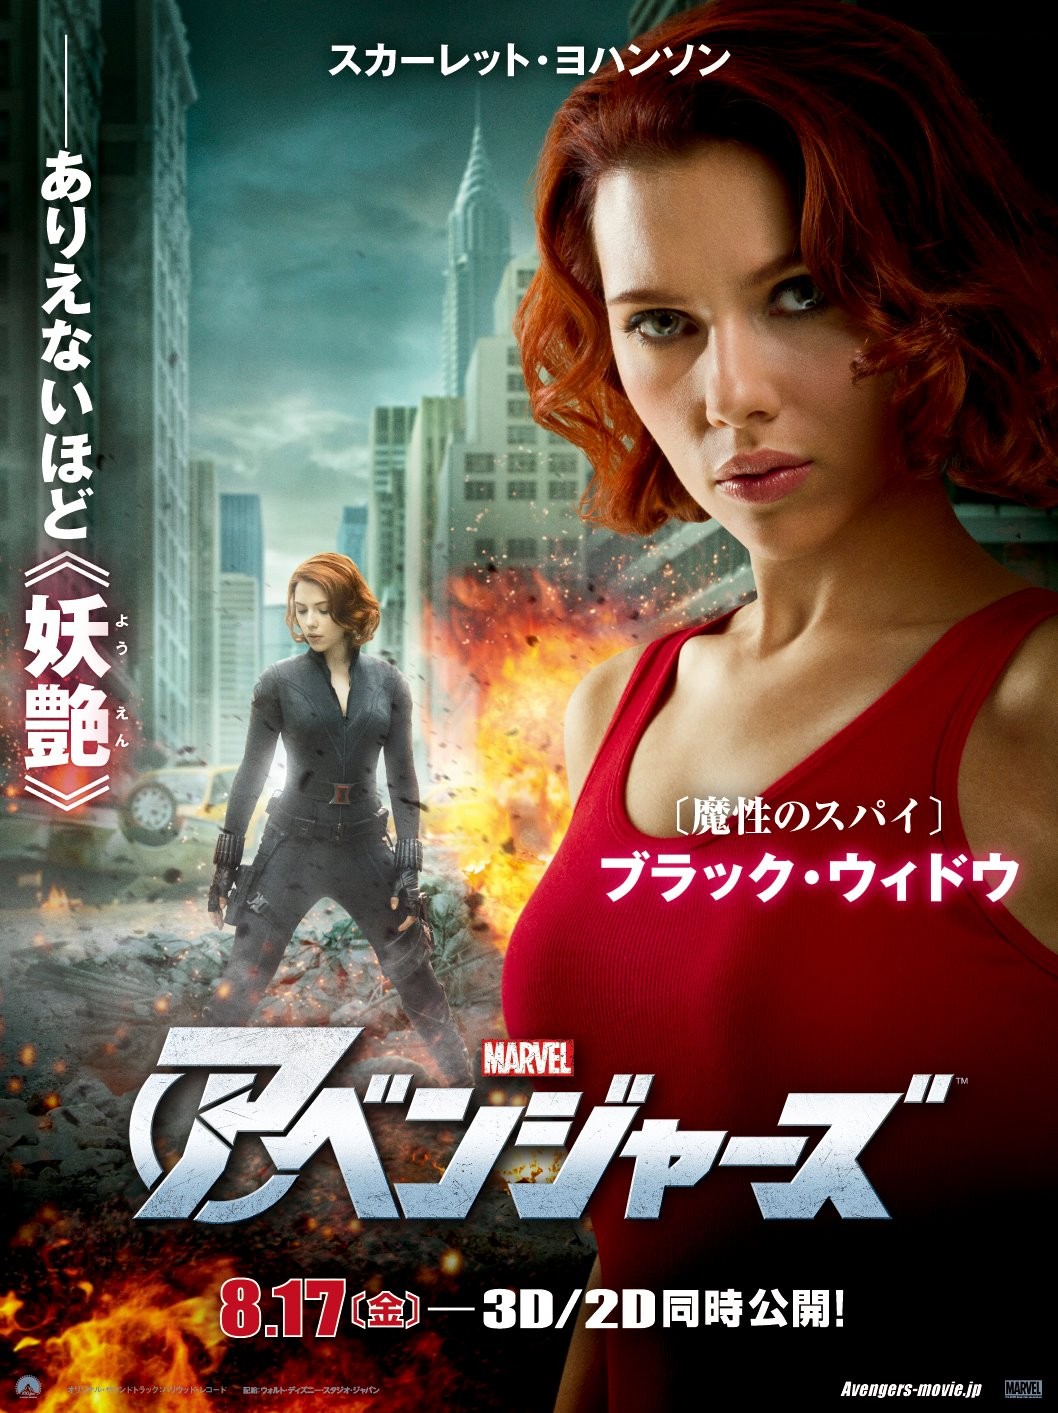 Extra Large Movie Poster Image for The Avengers (#30 of 35)